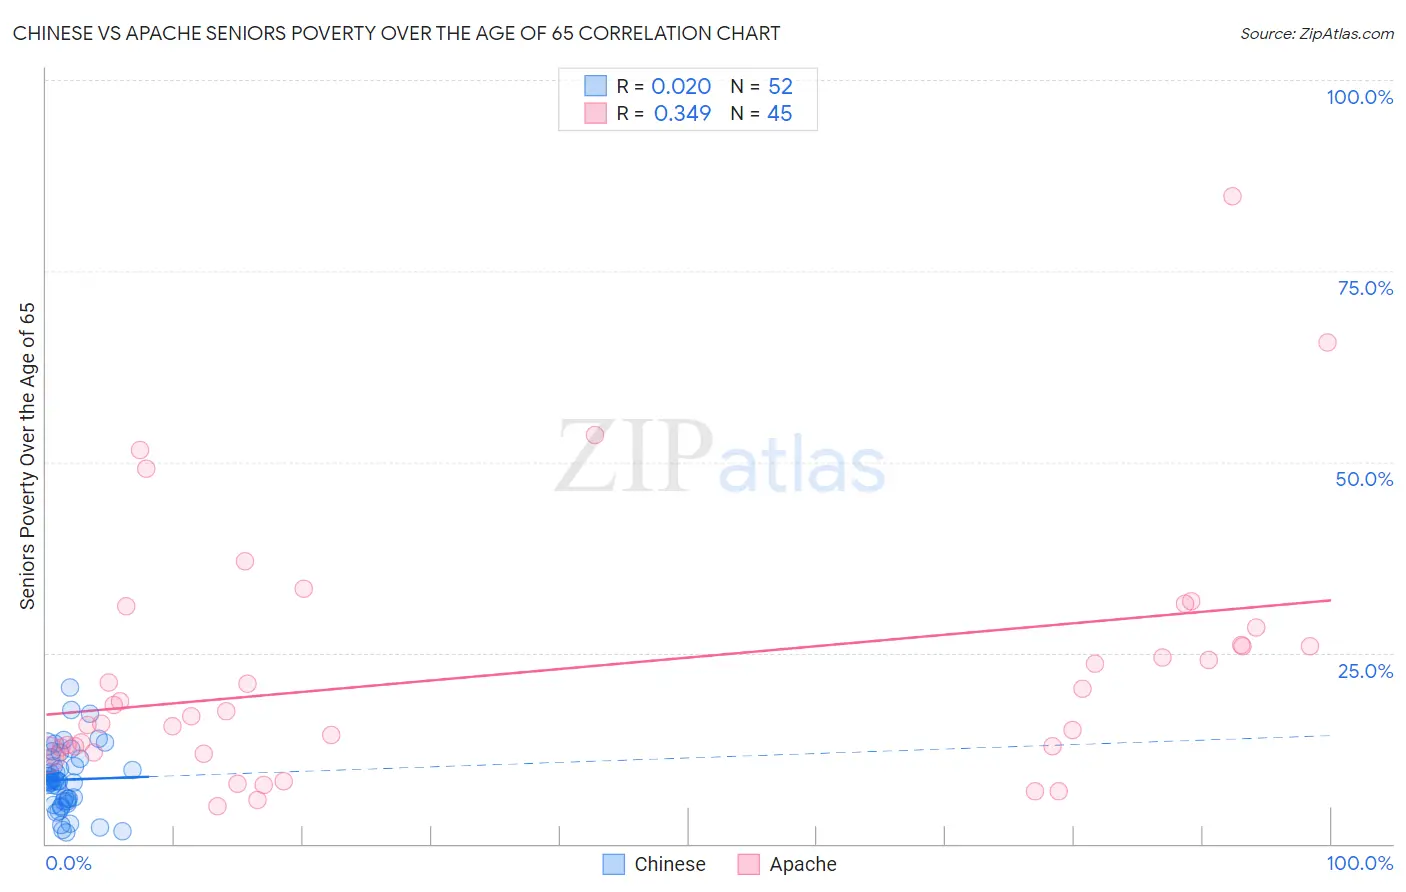 Chinese vs Apache Seniors Poverty Over the Age of 65